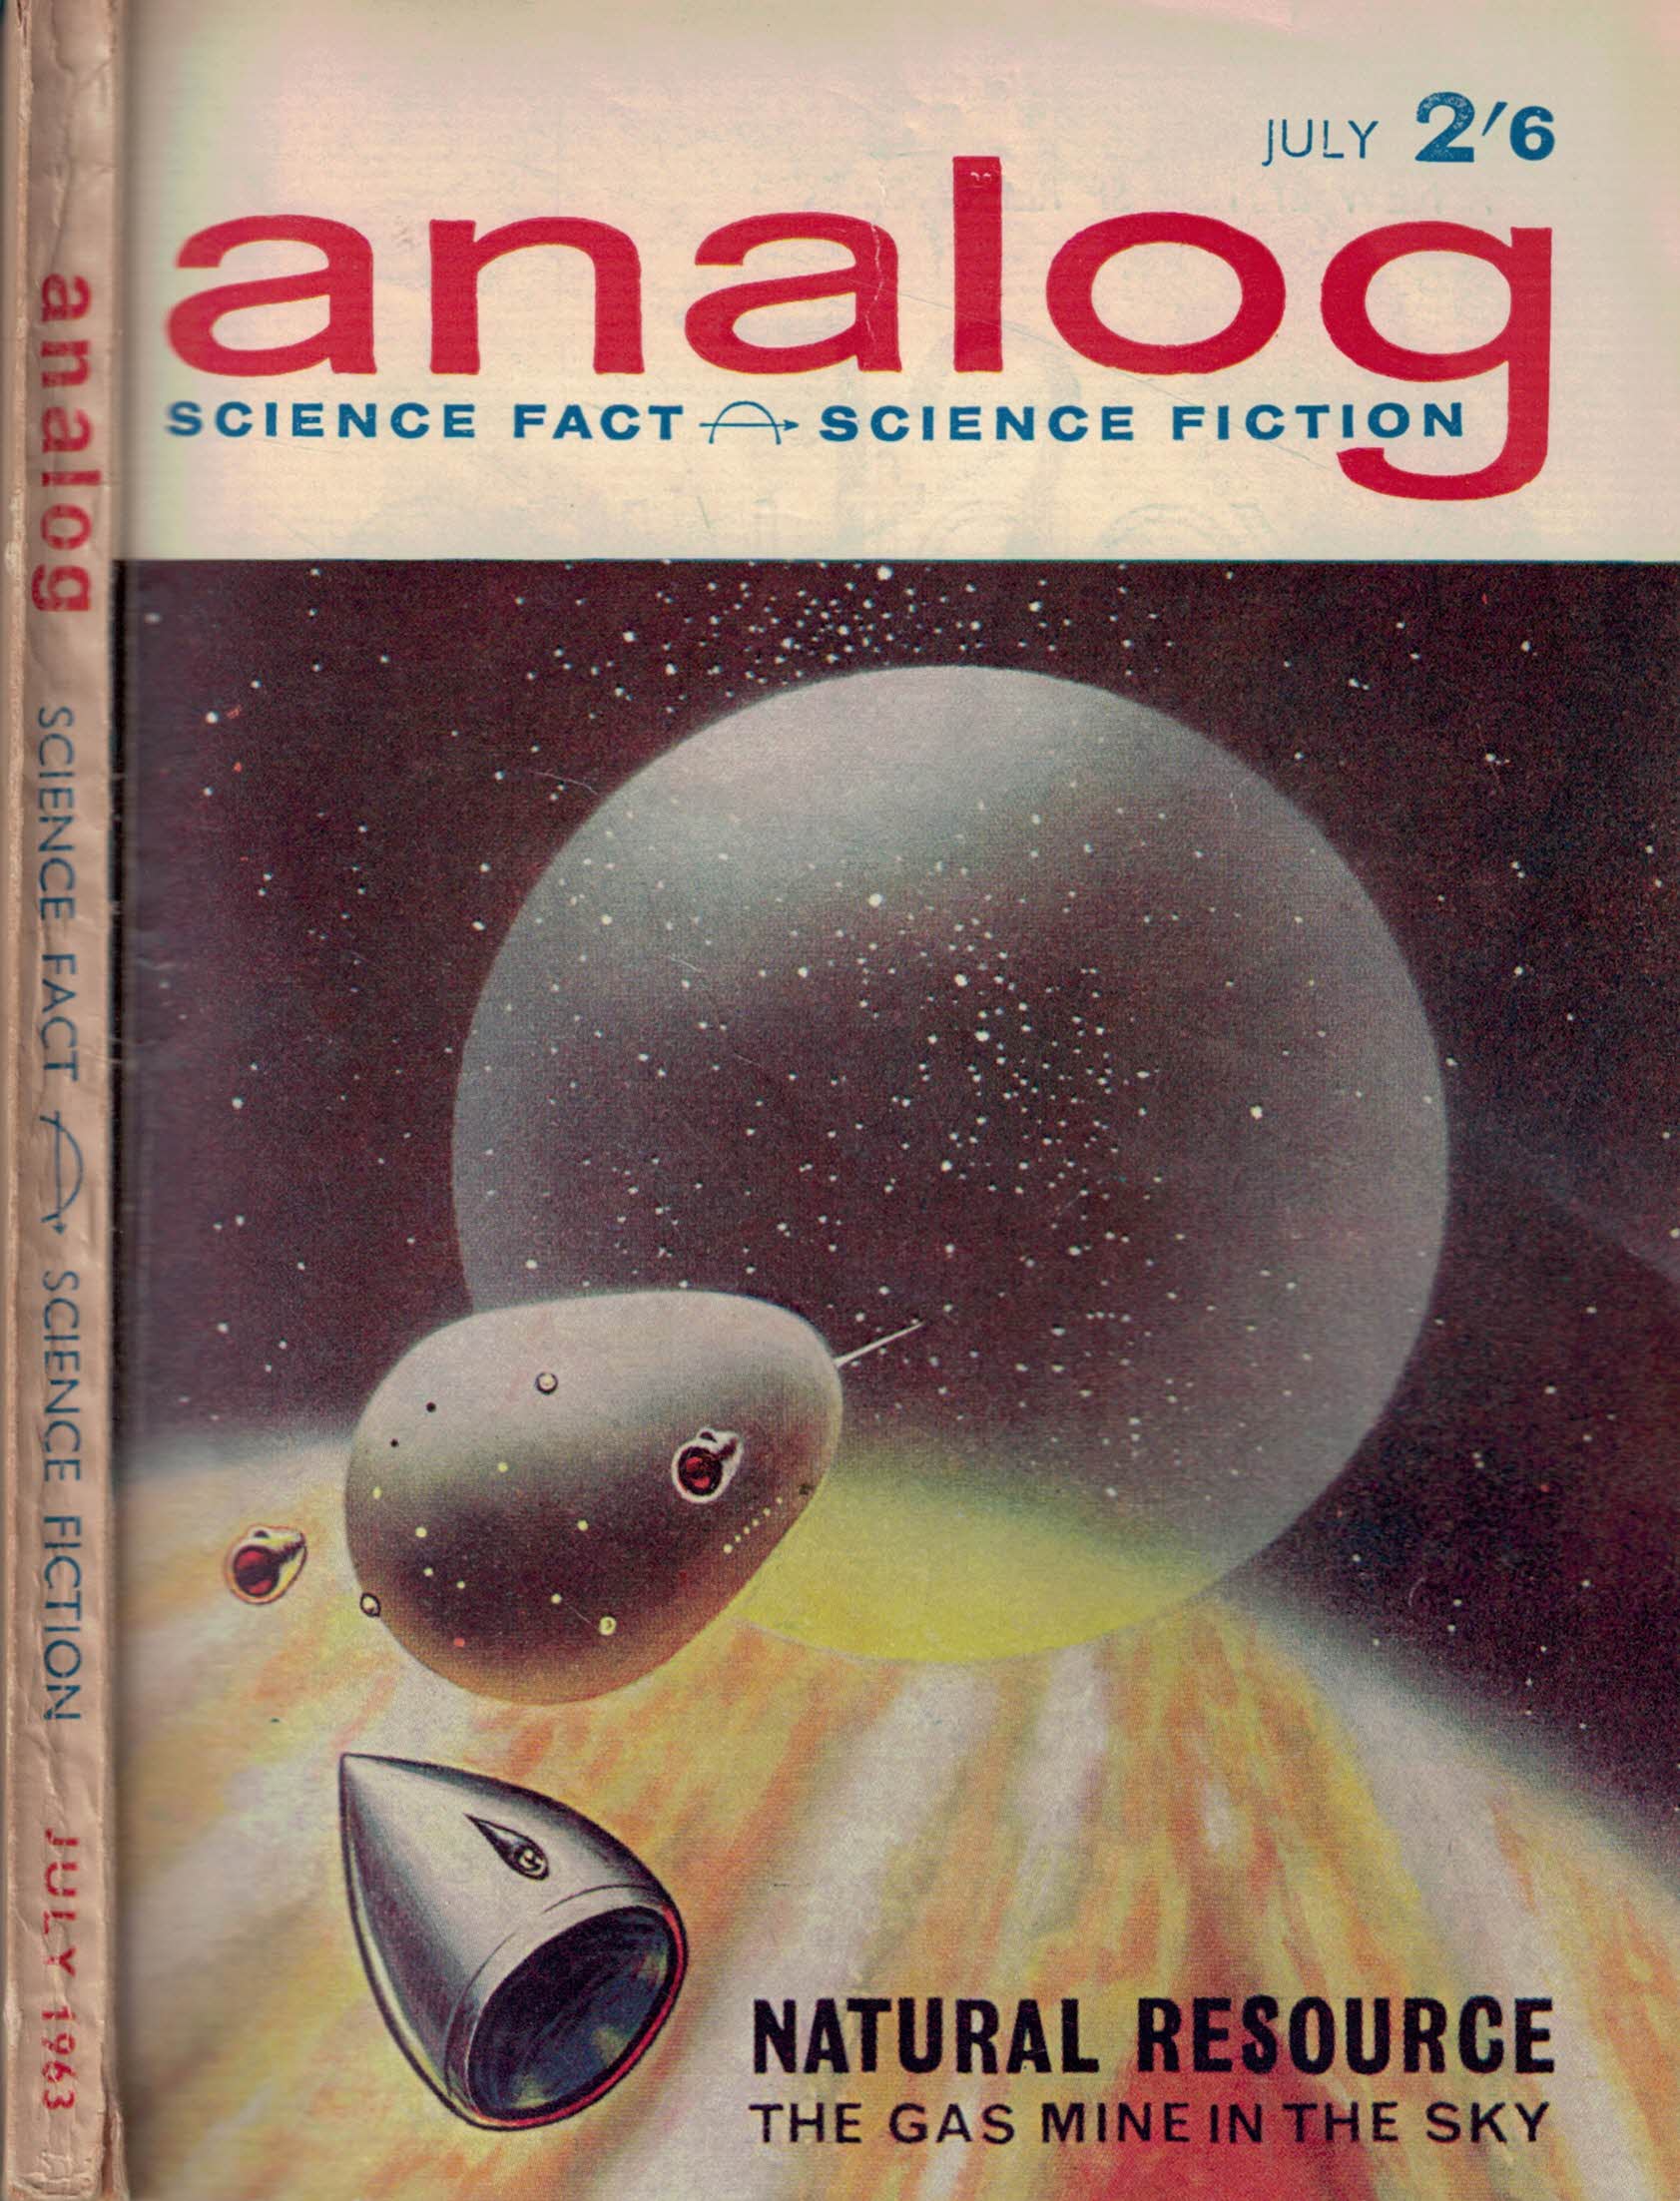 Analog. Science Fiction and Fact. Volume 19, Number 7. July 1963. British edition.